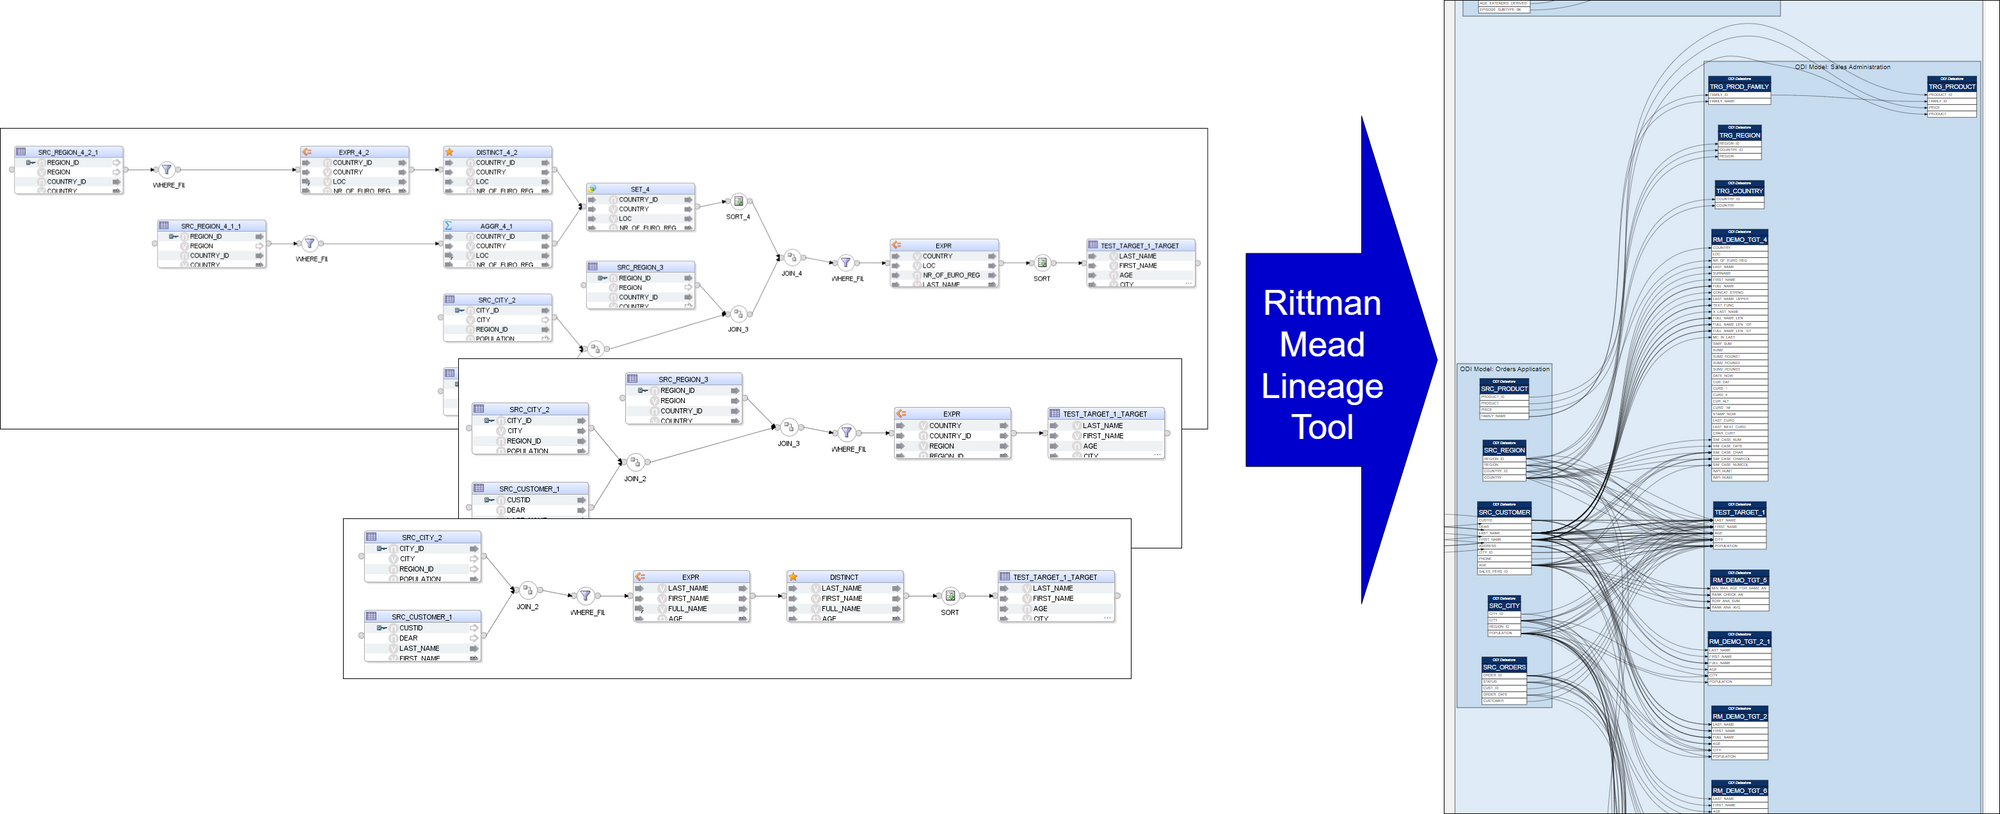 Rittman Mead Lineage Tool: from ODI Mappings to Mapping Lineage Visualisation